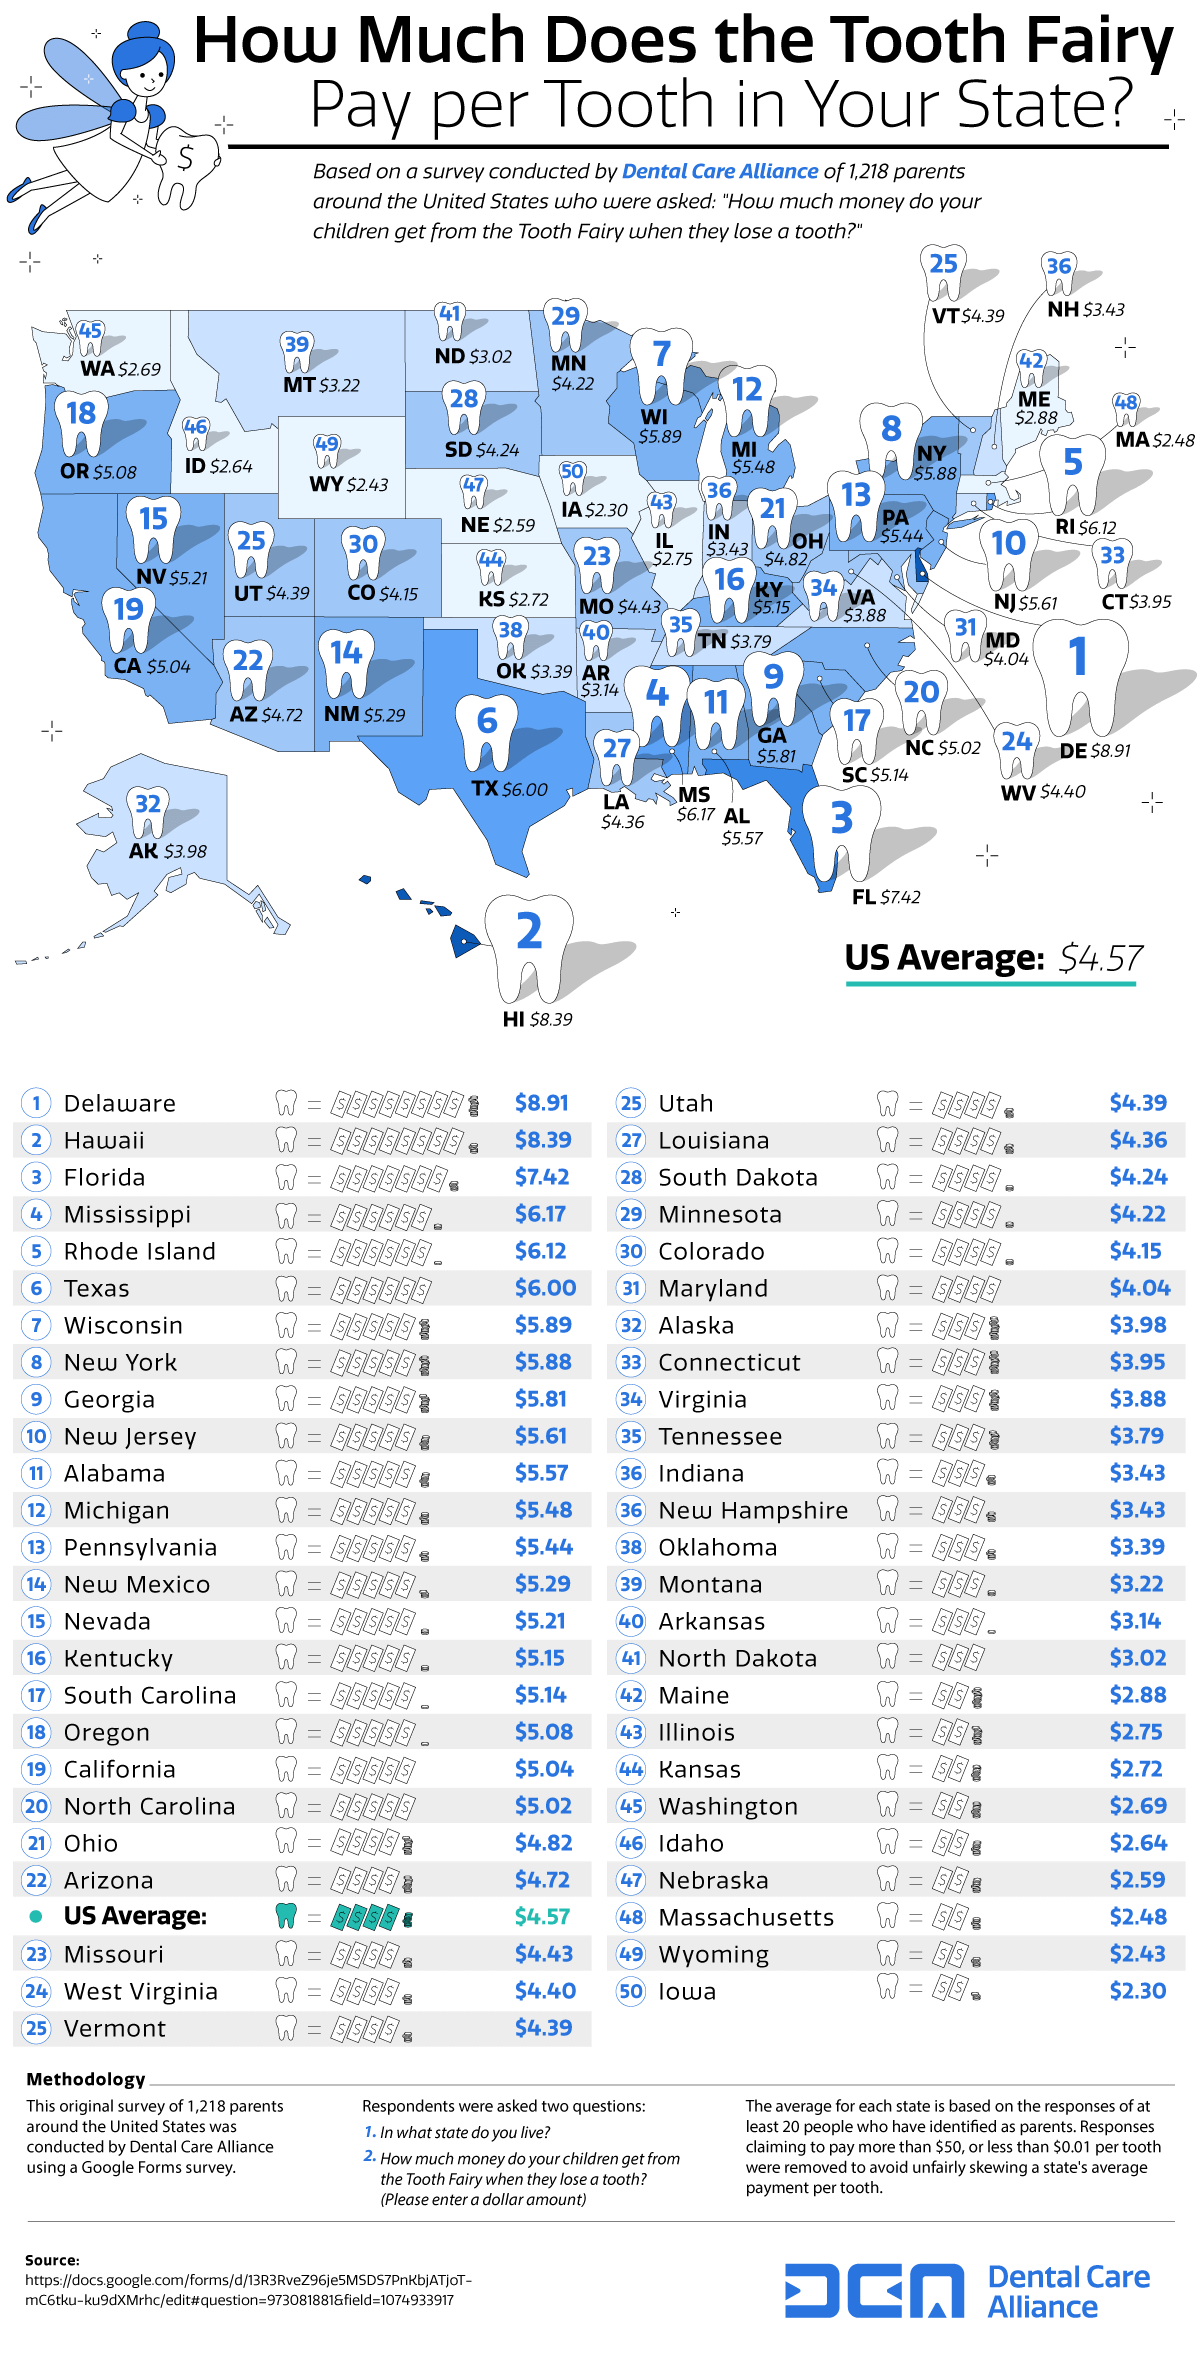 How Much Does the Tooth Fairy Pay per Tooth in Your State? - Dental Care Alliance Dental Support Organization - Infographic